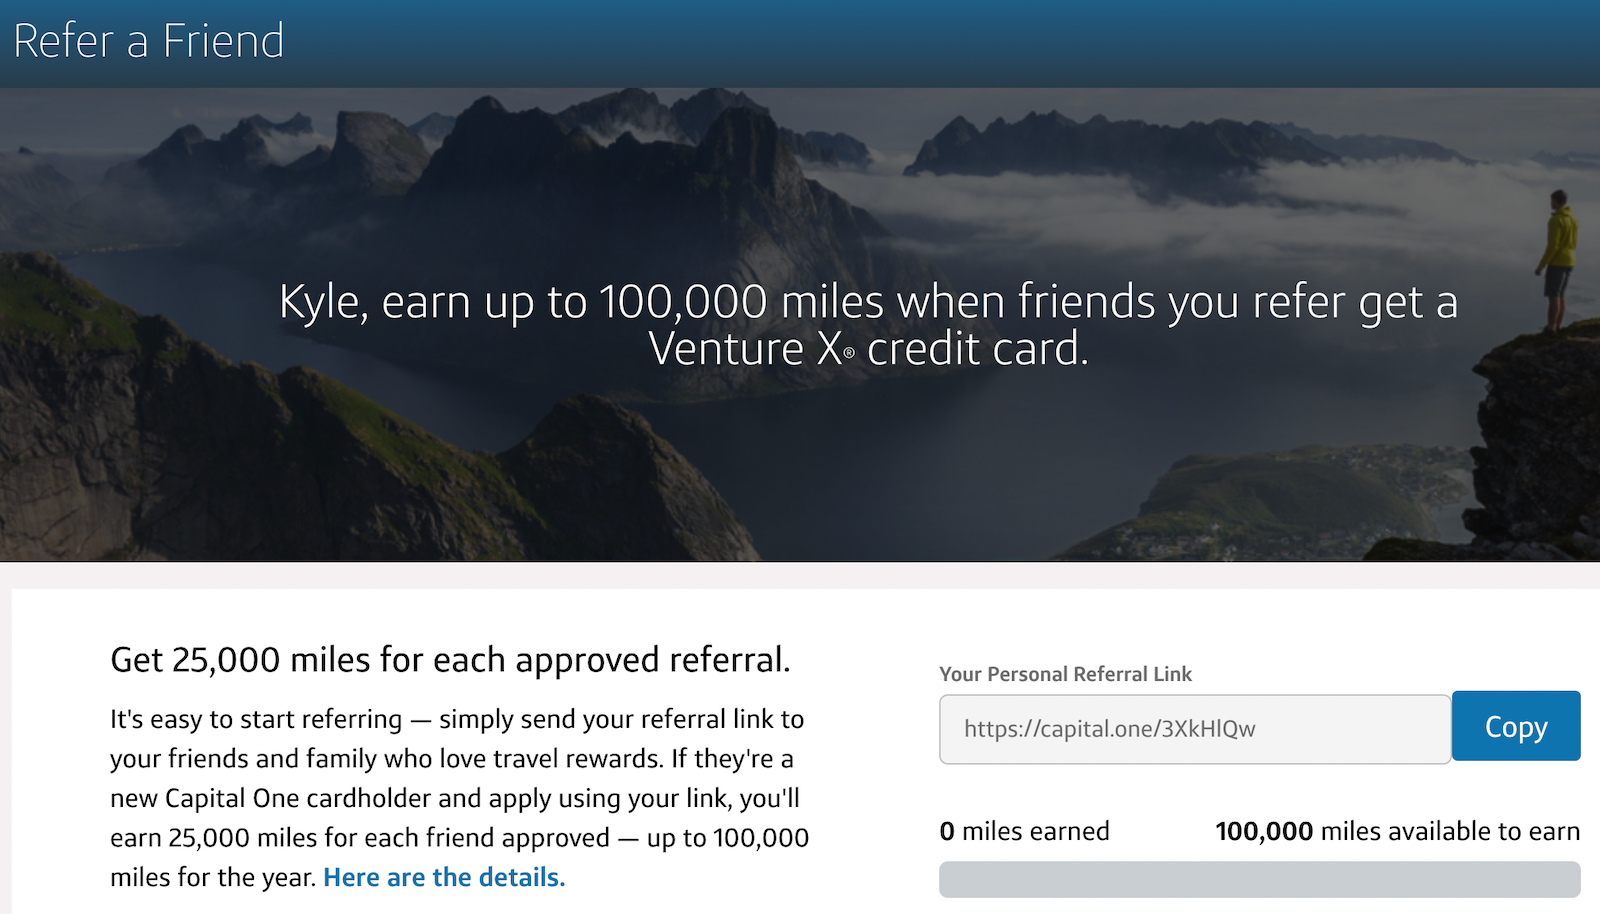 details on referral bonuses for the Capital One Venture X card